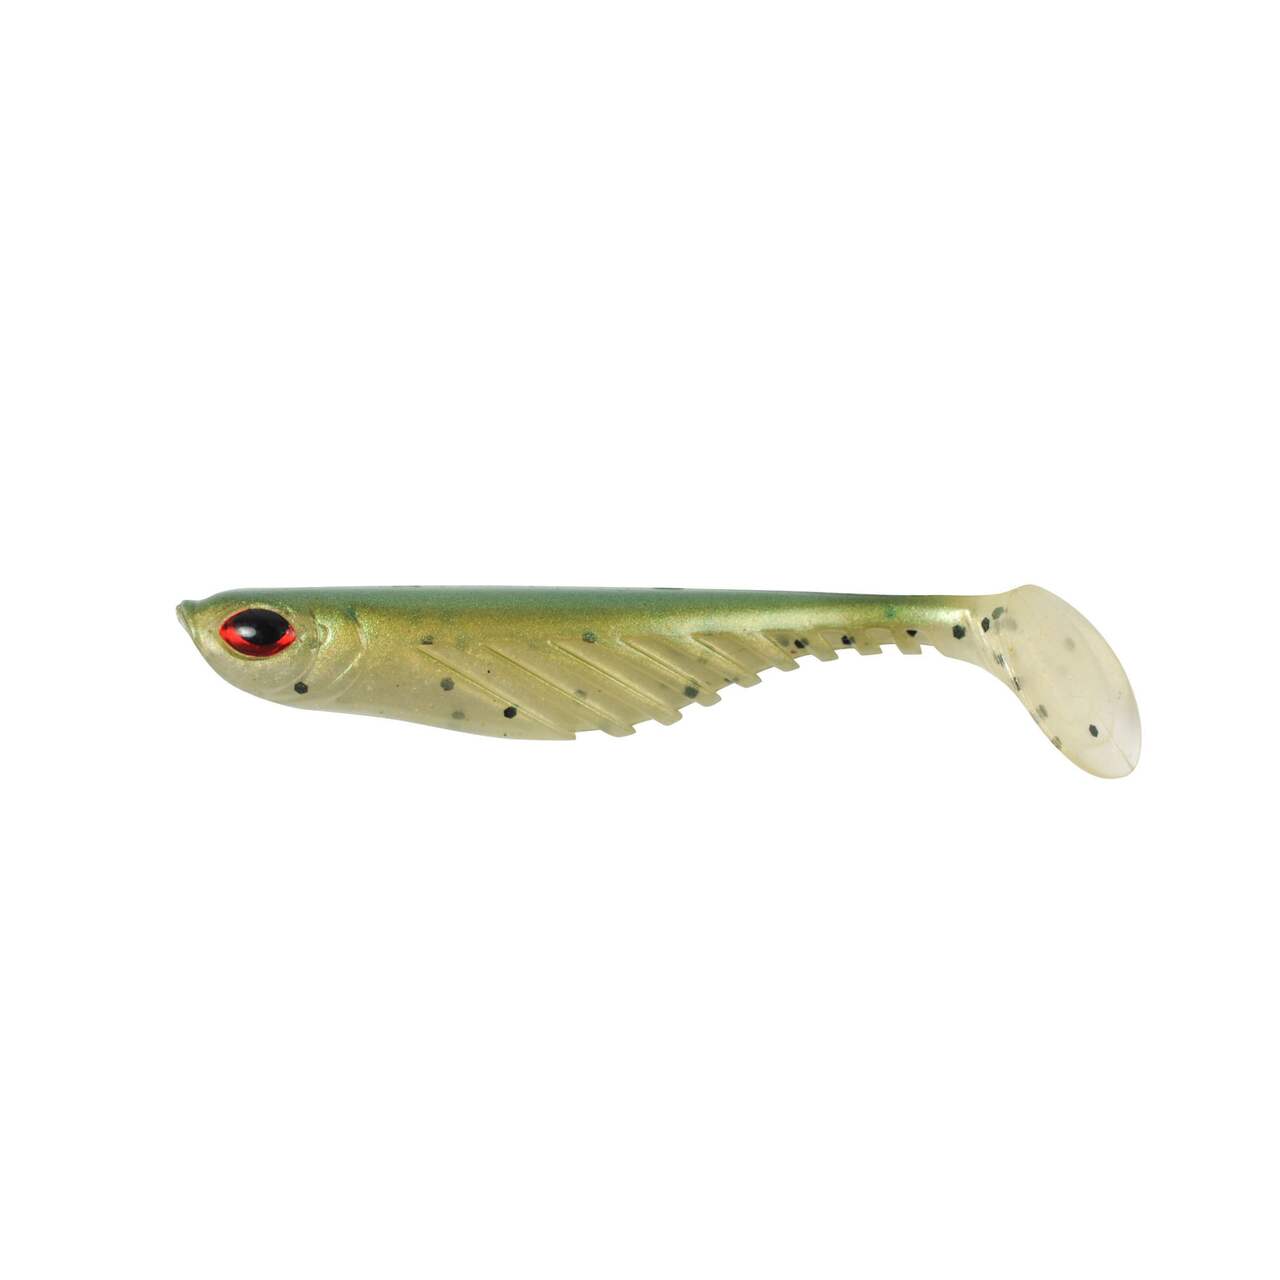 https://media-www.canadiantire.ca/product/playing/fishing/fishing-lures/0781576/berkley-power-bait-ripple-shad-green-back-pearl-3--d79874f5-2556-4a83-a937-c3359f2bff05-jpgrendition.jpg?imdensity=1&imwidth=640&impolicy=mZoom